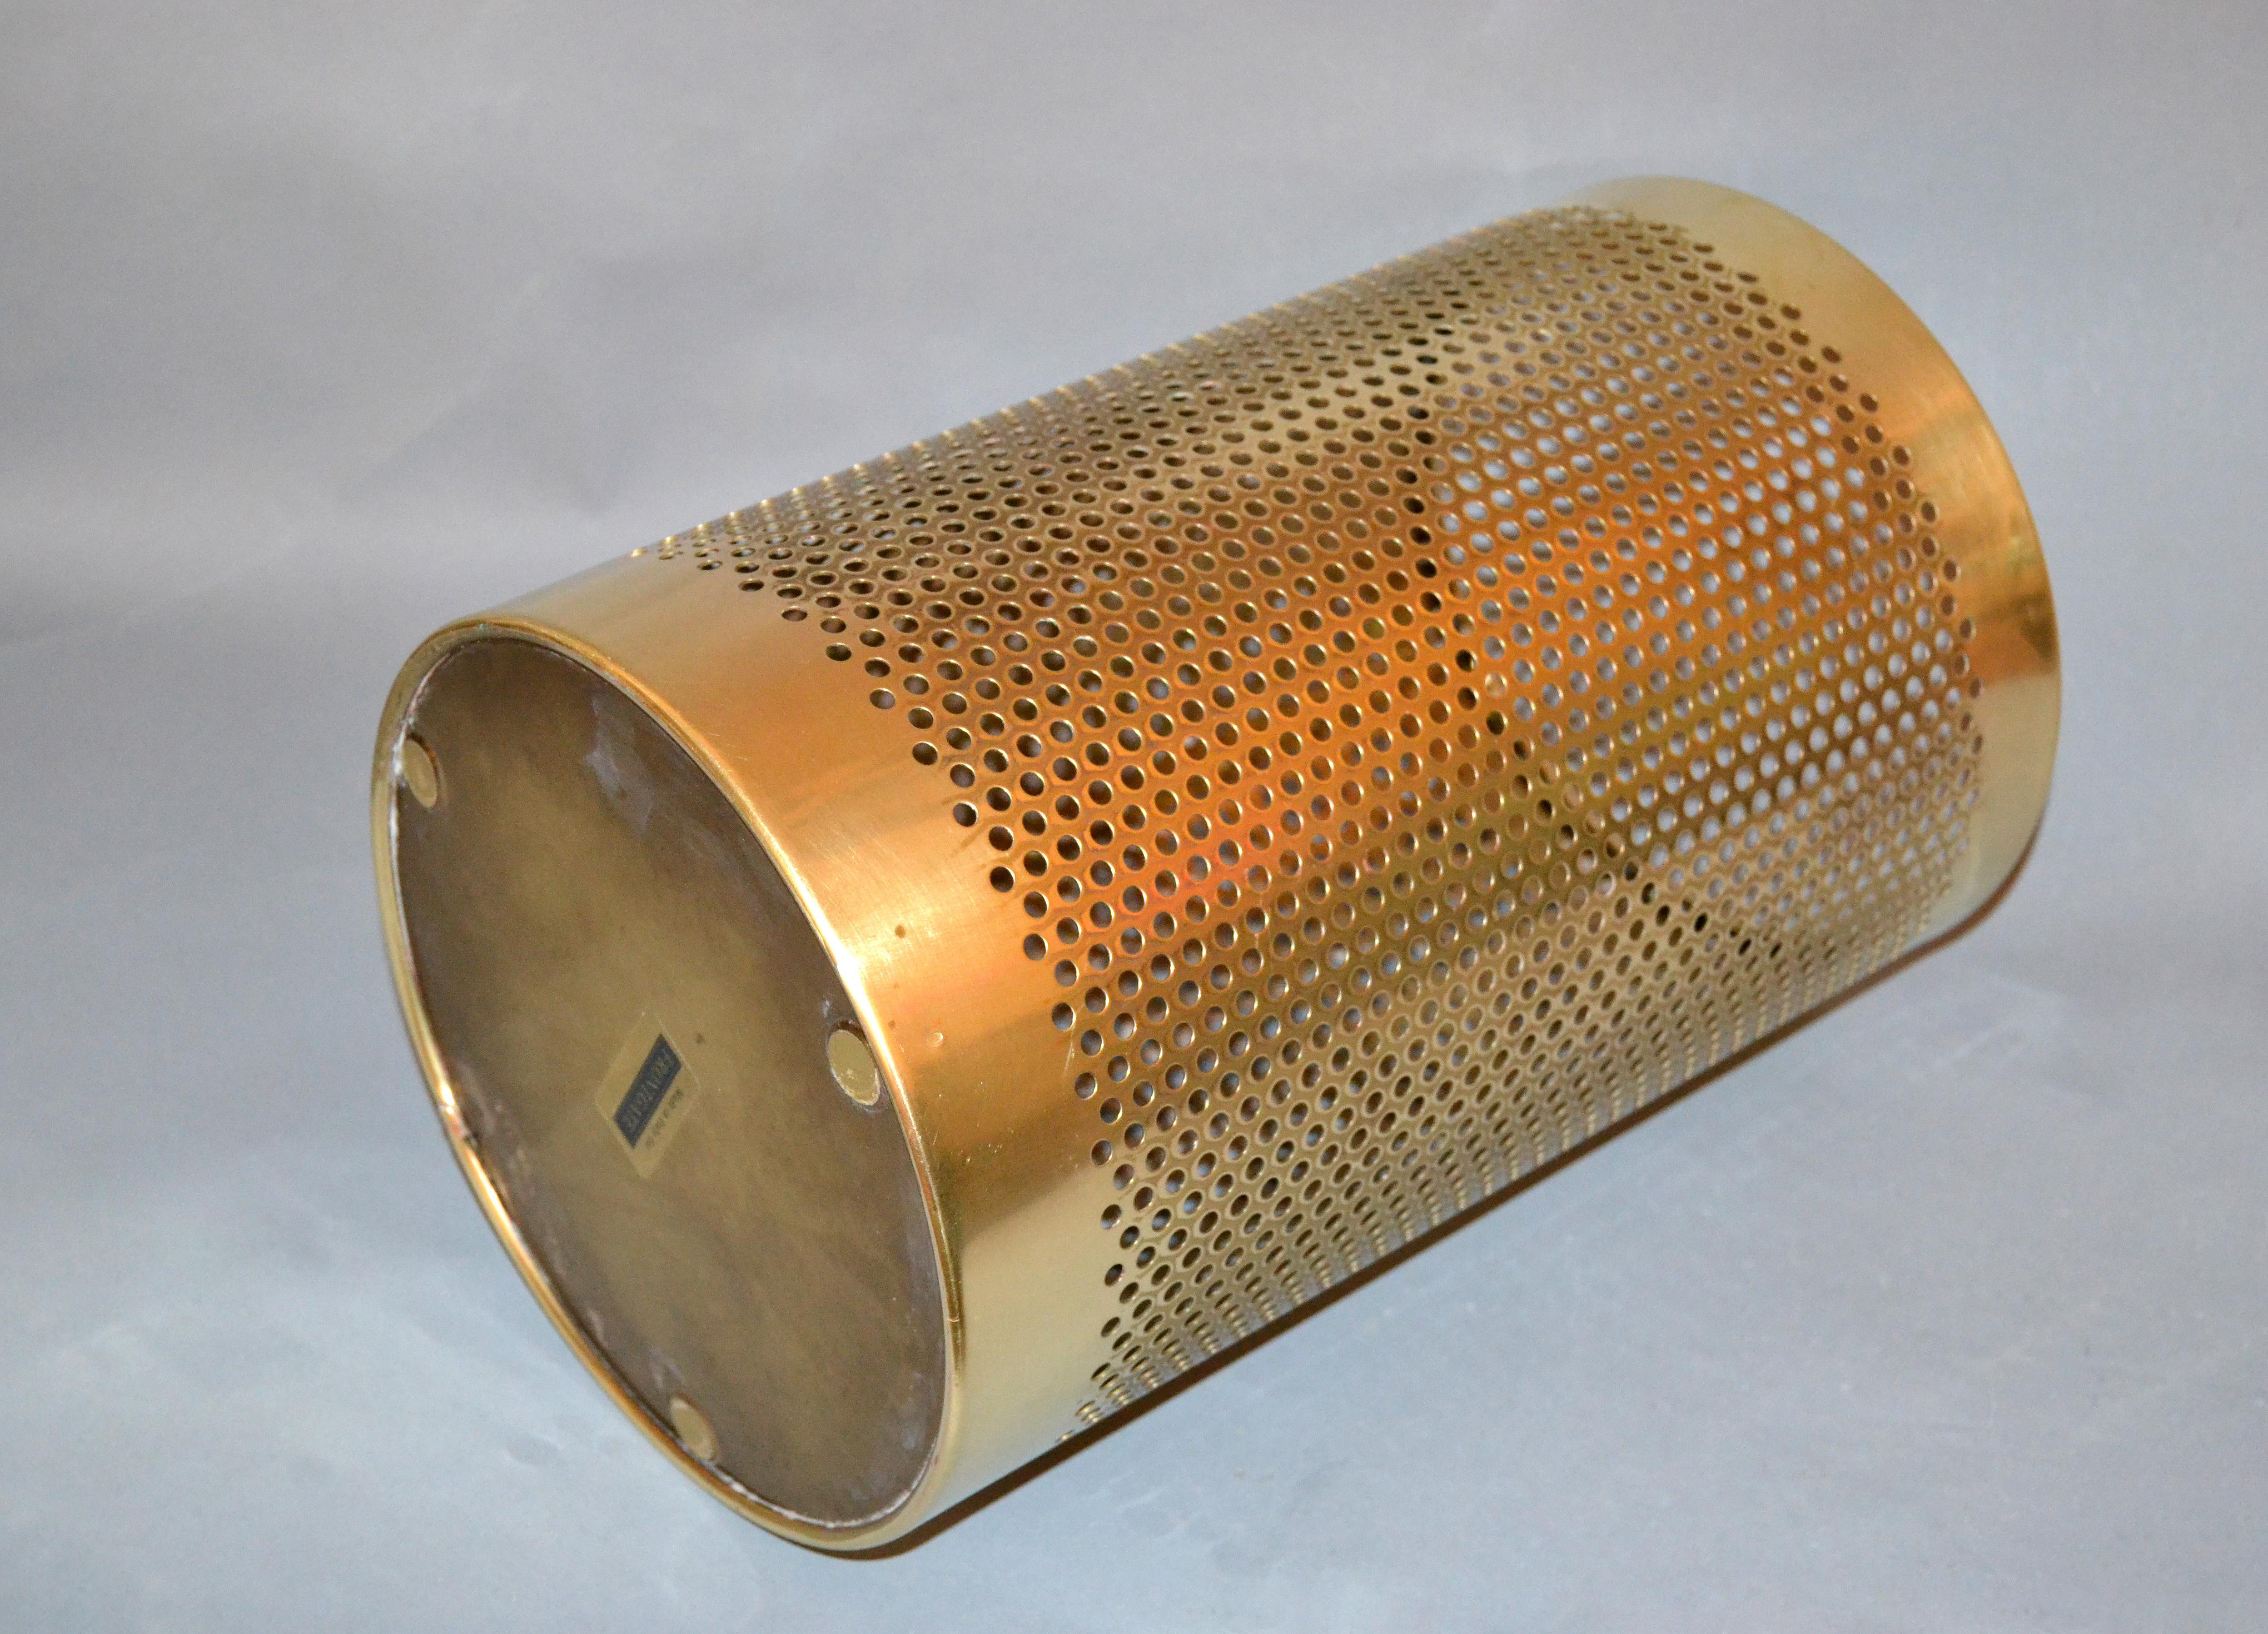 20th Century Vintage Frontgate Brass Italian Perforated Trash Waste Basket, Waste Can Italy